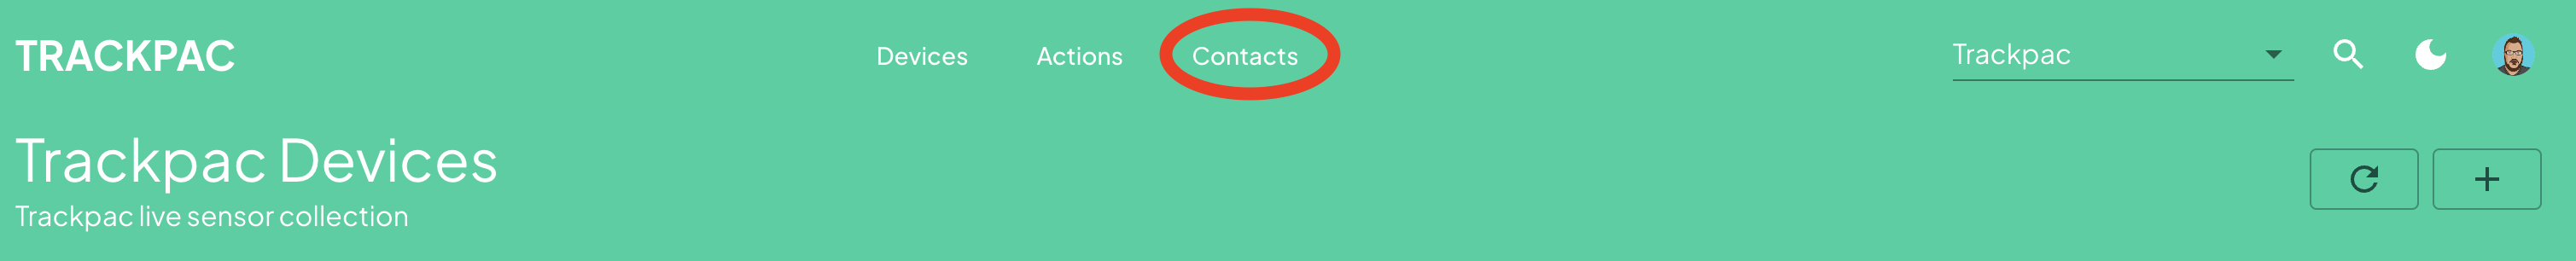 contacts link